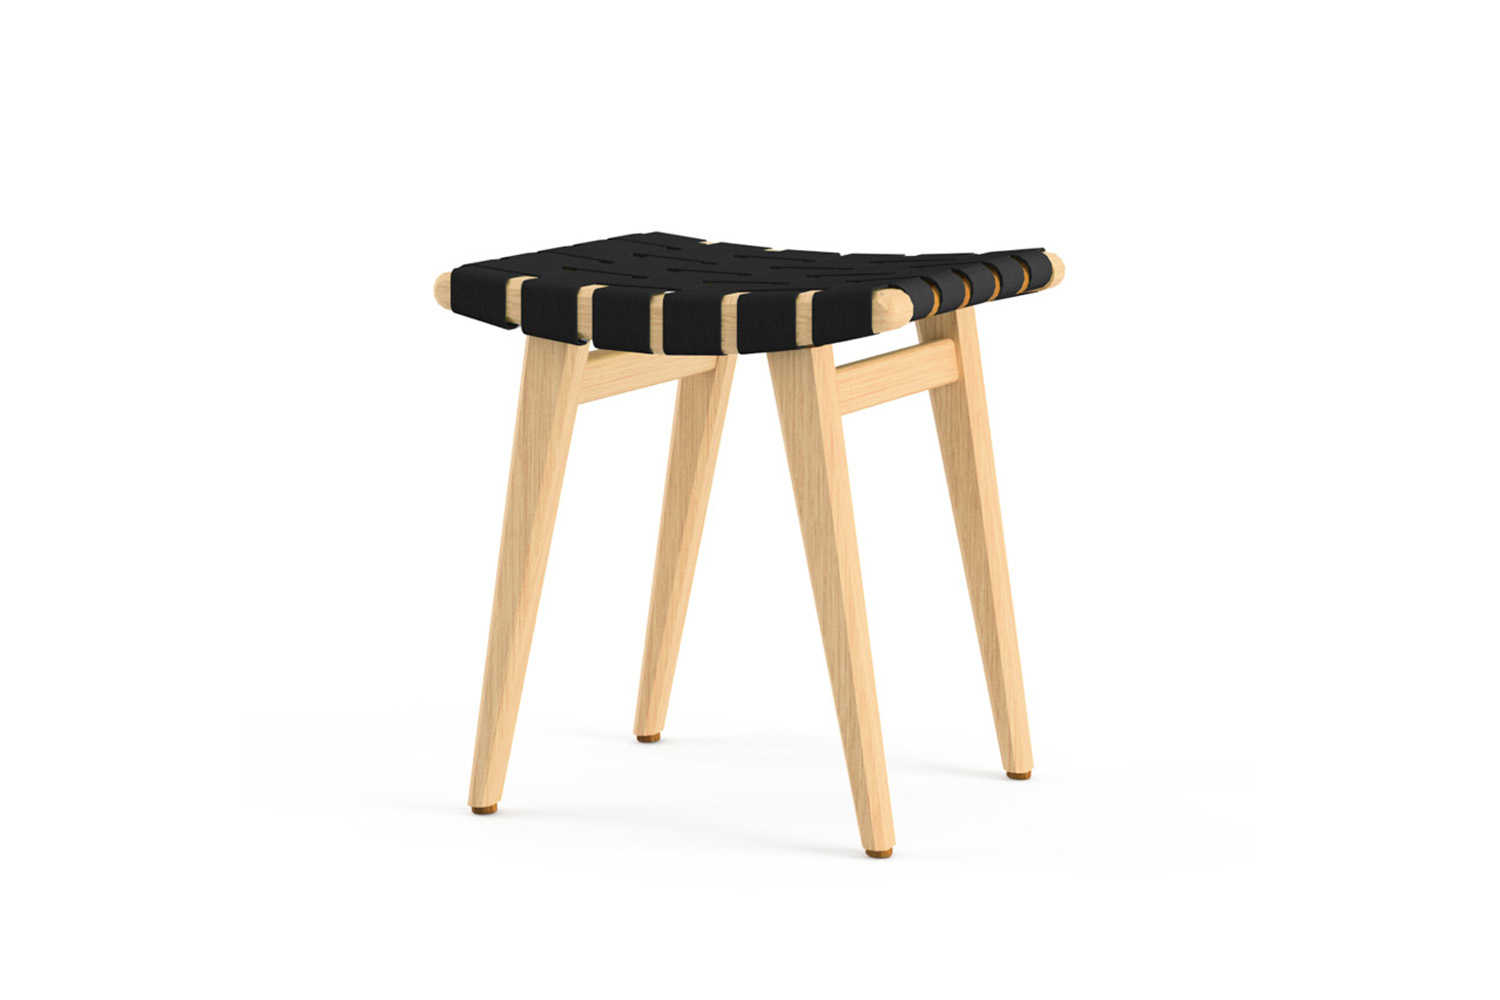 designed by jens risom in \1943, the risom stool comes in a range of combinatio 18